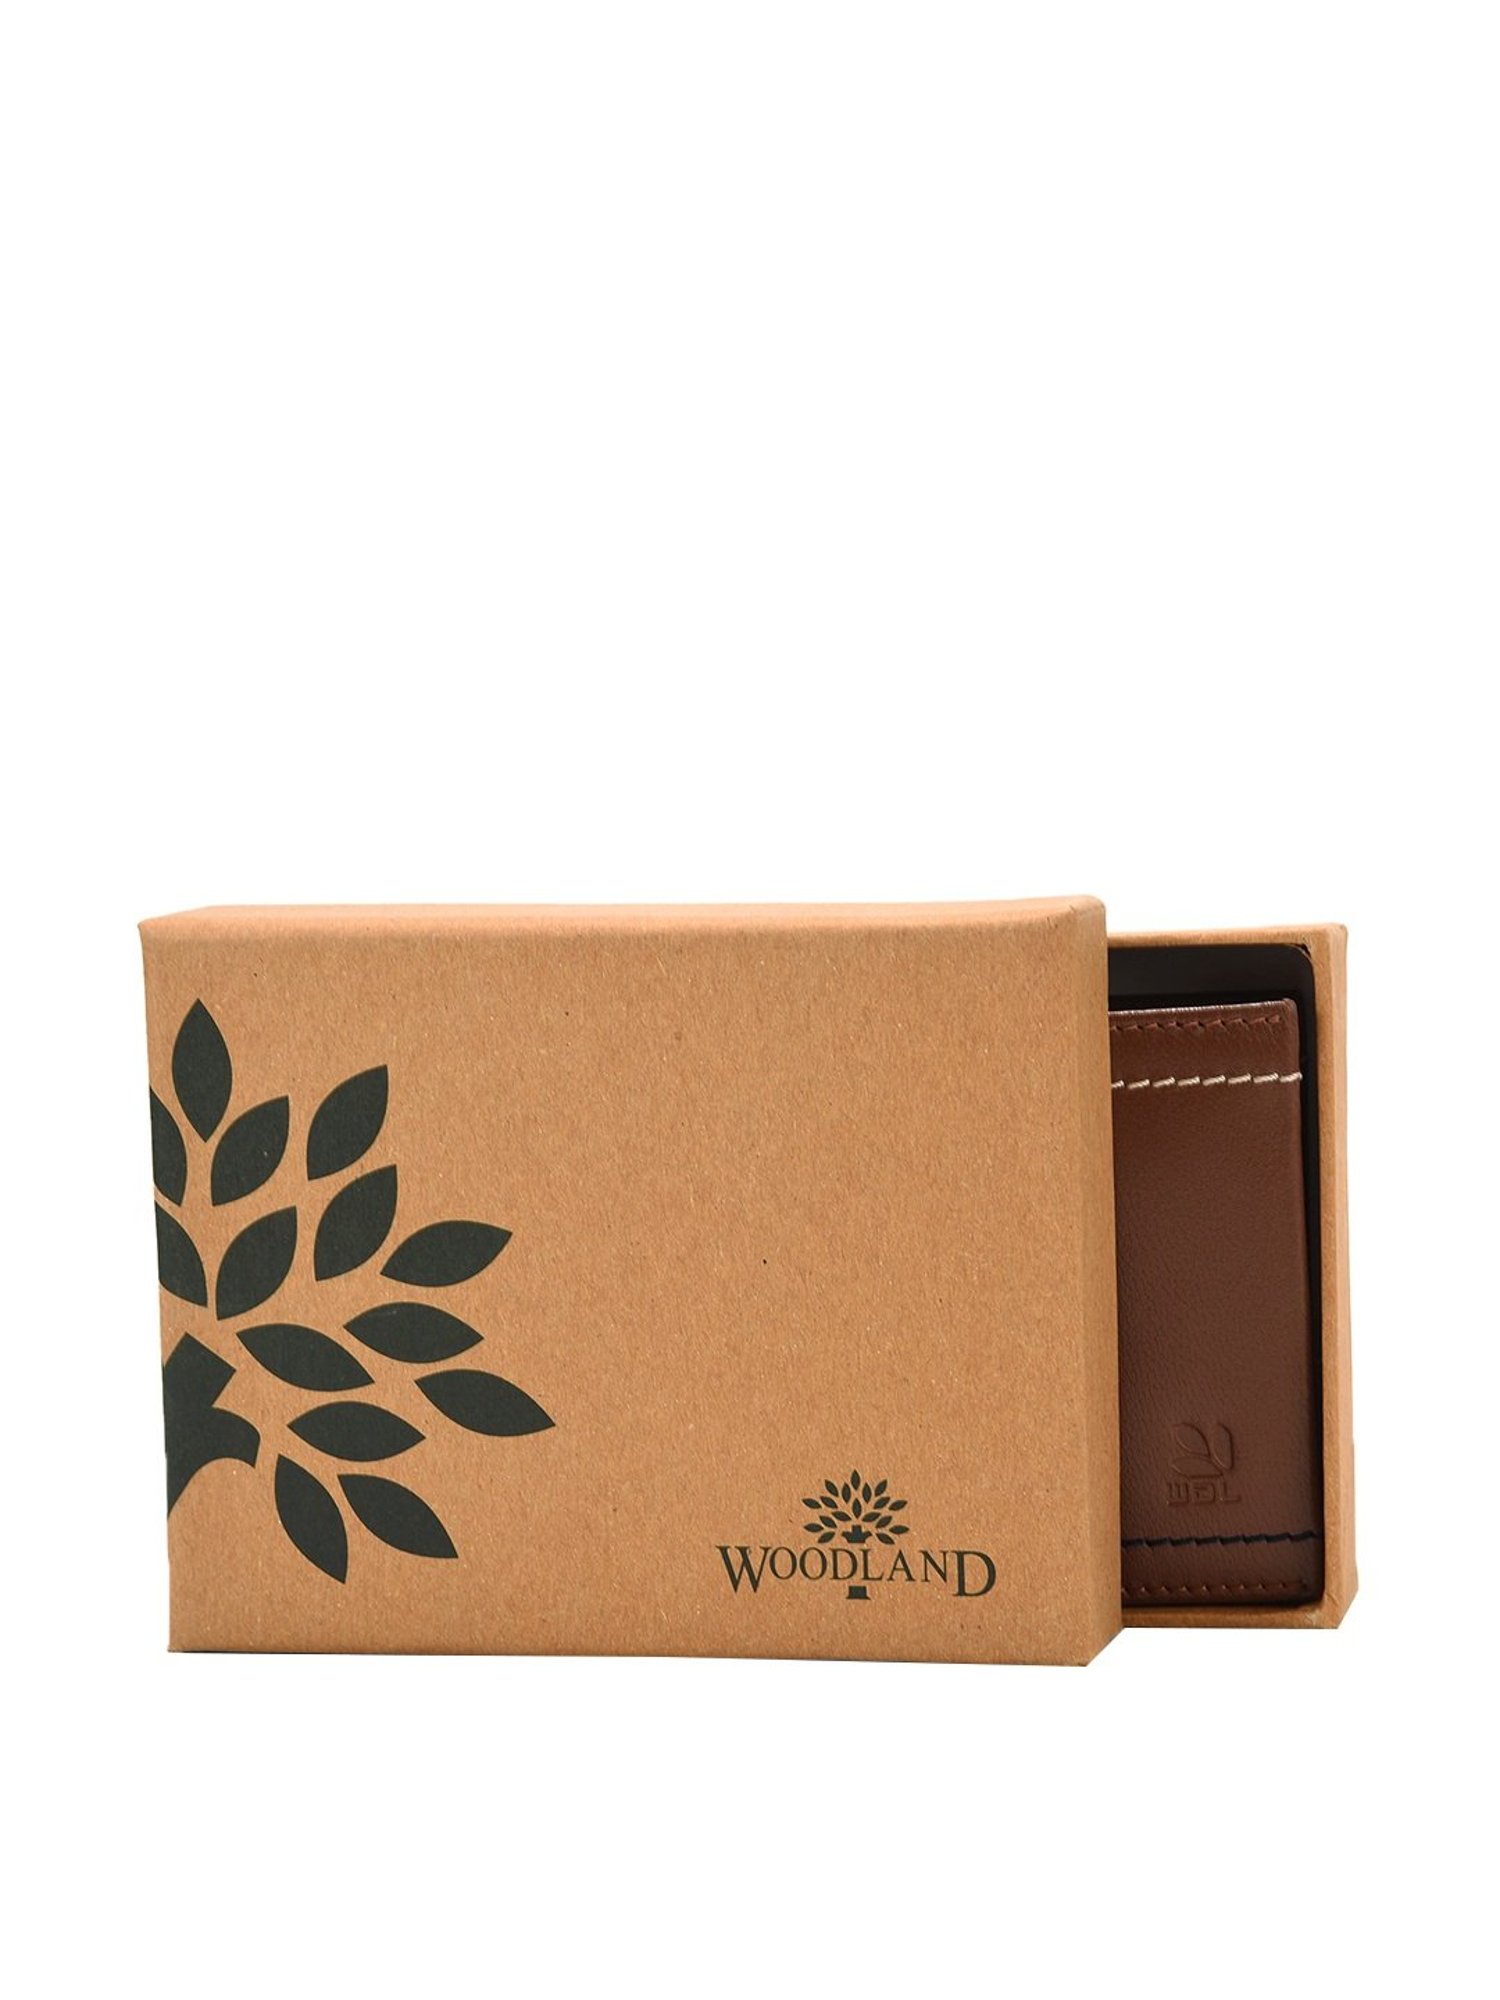 Mens Wallets | Leather Wallets & Card Holders for Men | Yoshi – Tagged  